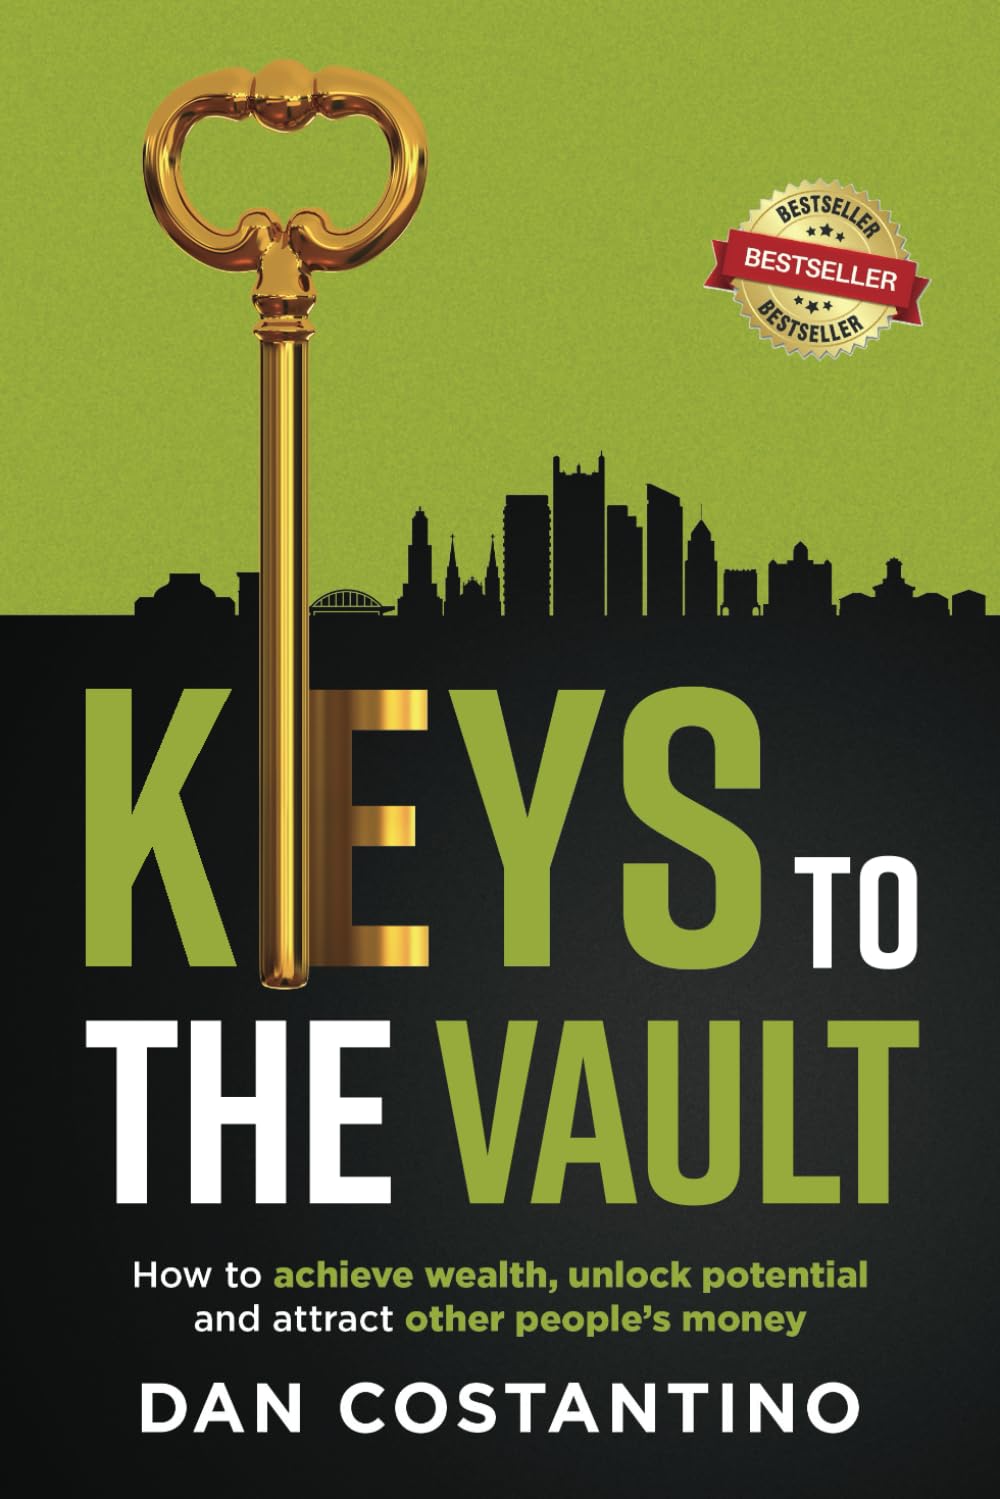 Keys To The Vault: How to achieve wealth, unlock potential, and attract other people’s money